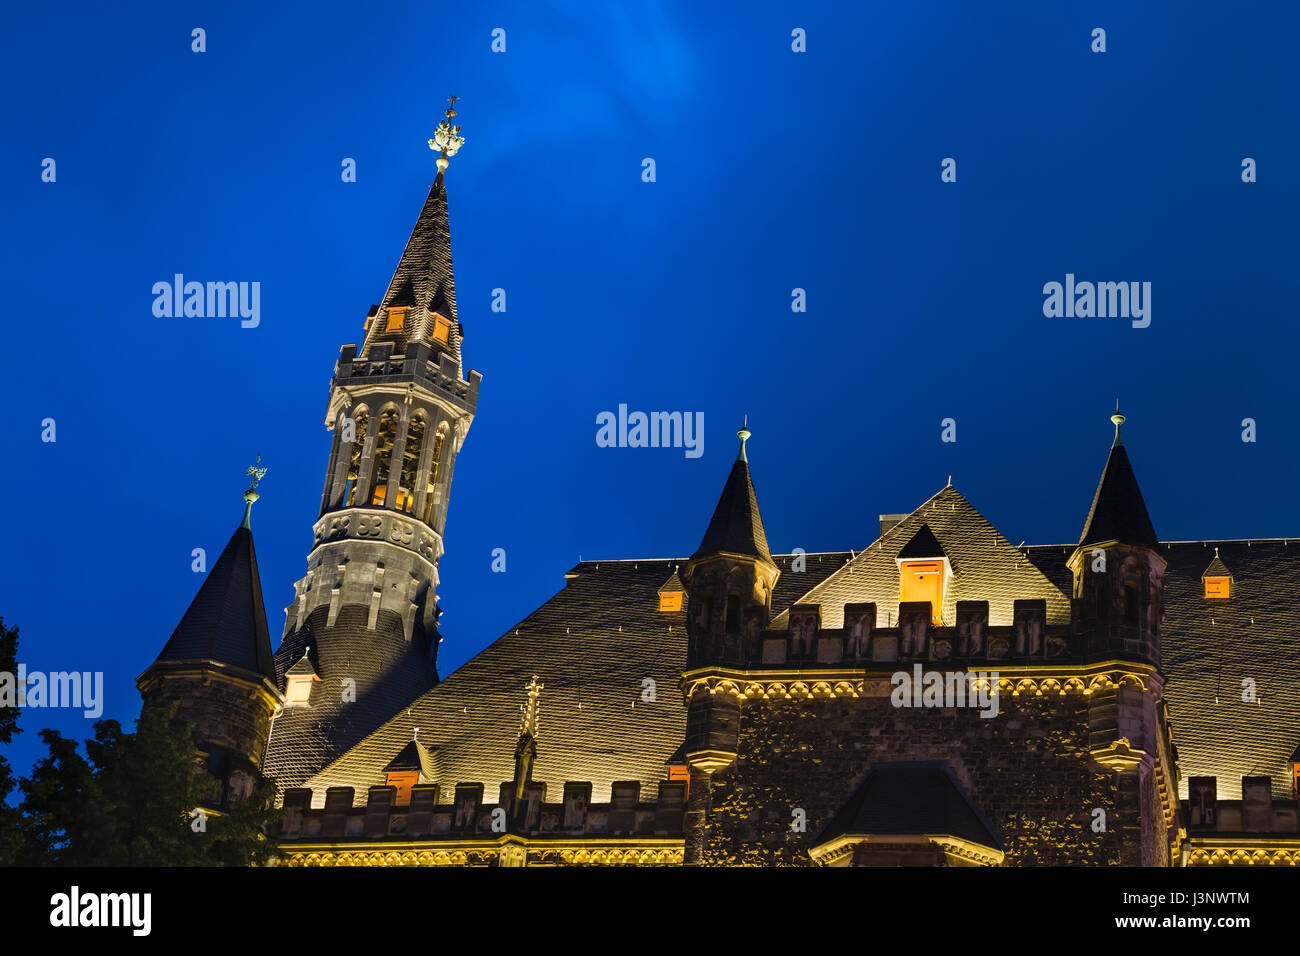 One of the towers of the old town hall of Aachen, Germany with night blue sky seen from the Katschhof. Stock Photo